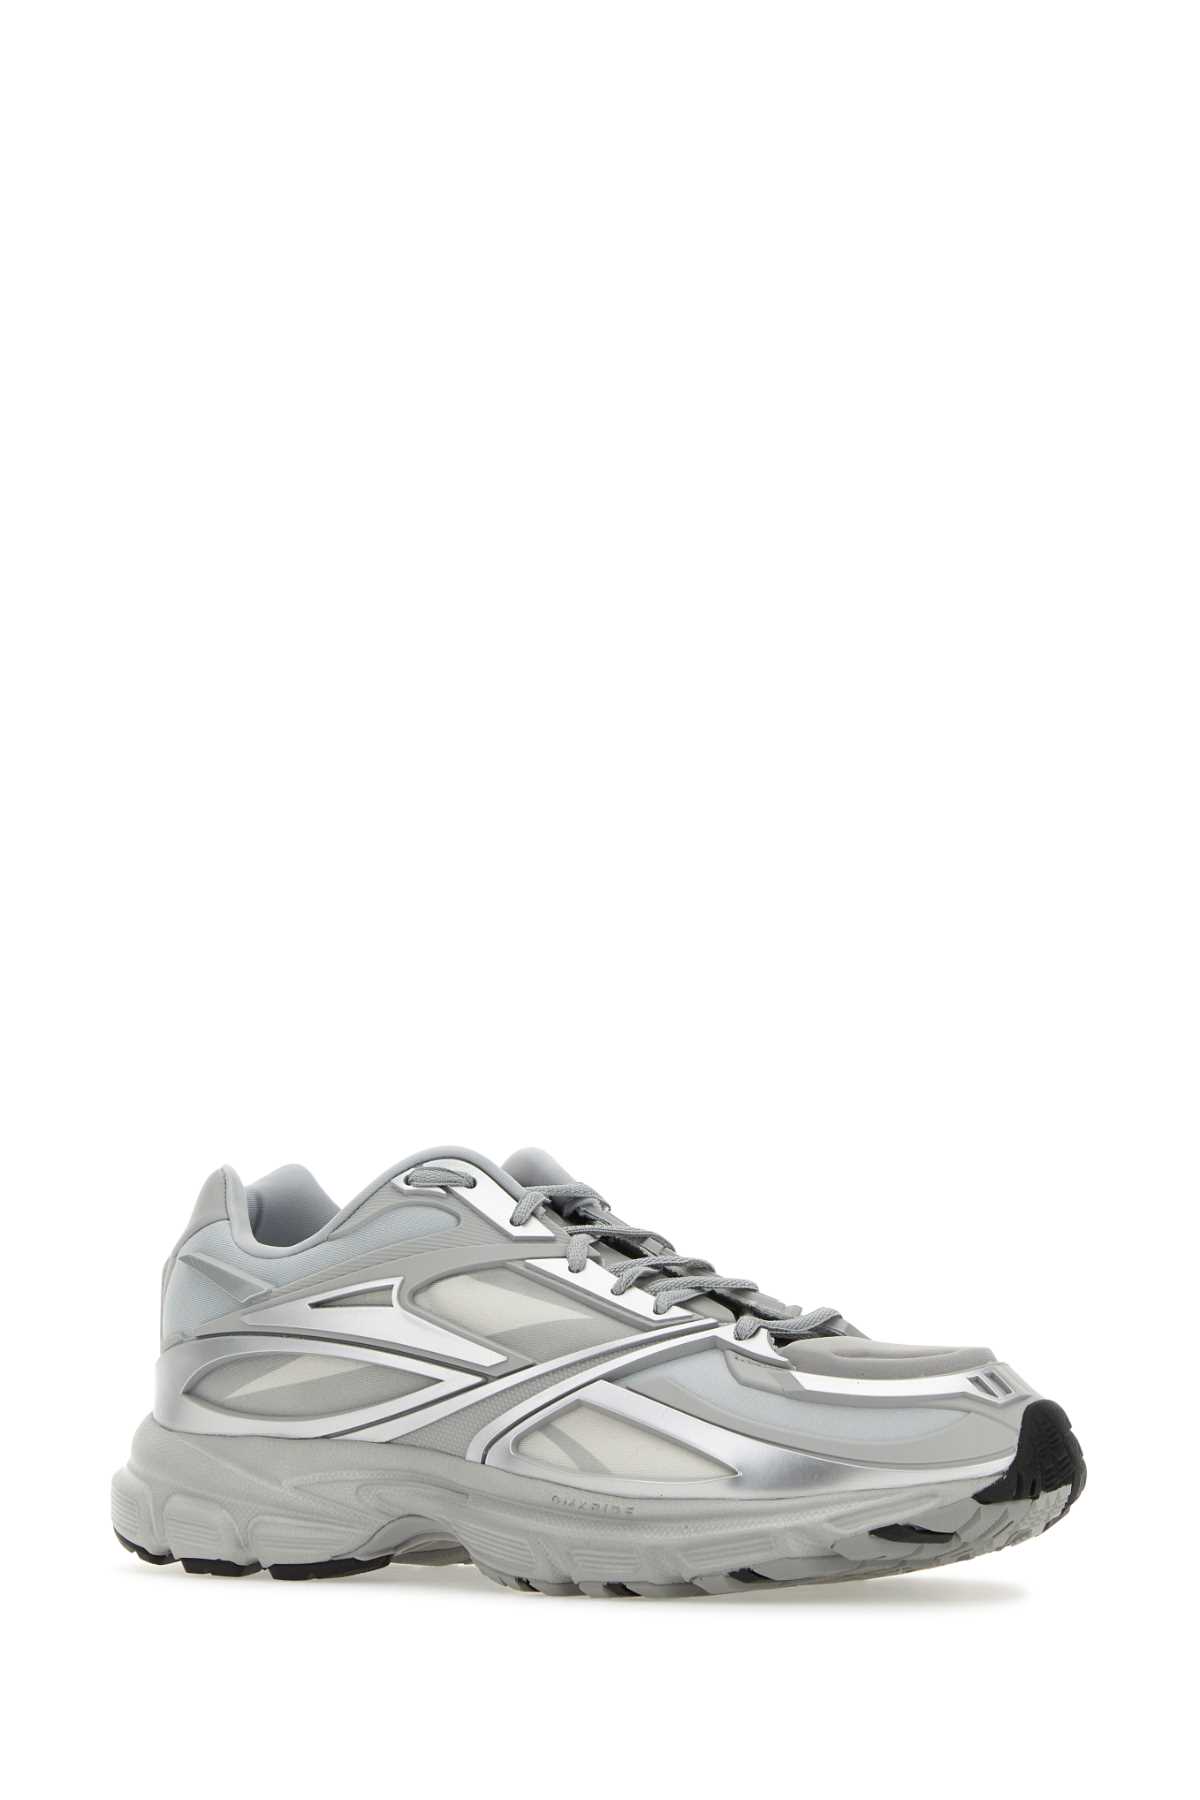 REEBOK GREY FABRIC AND RUBBER PREMIER ROAD MODERN SNEAKERS